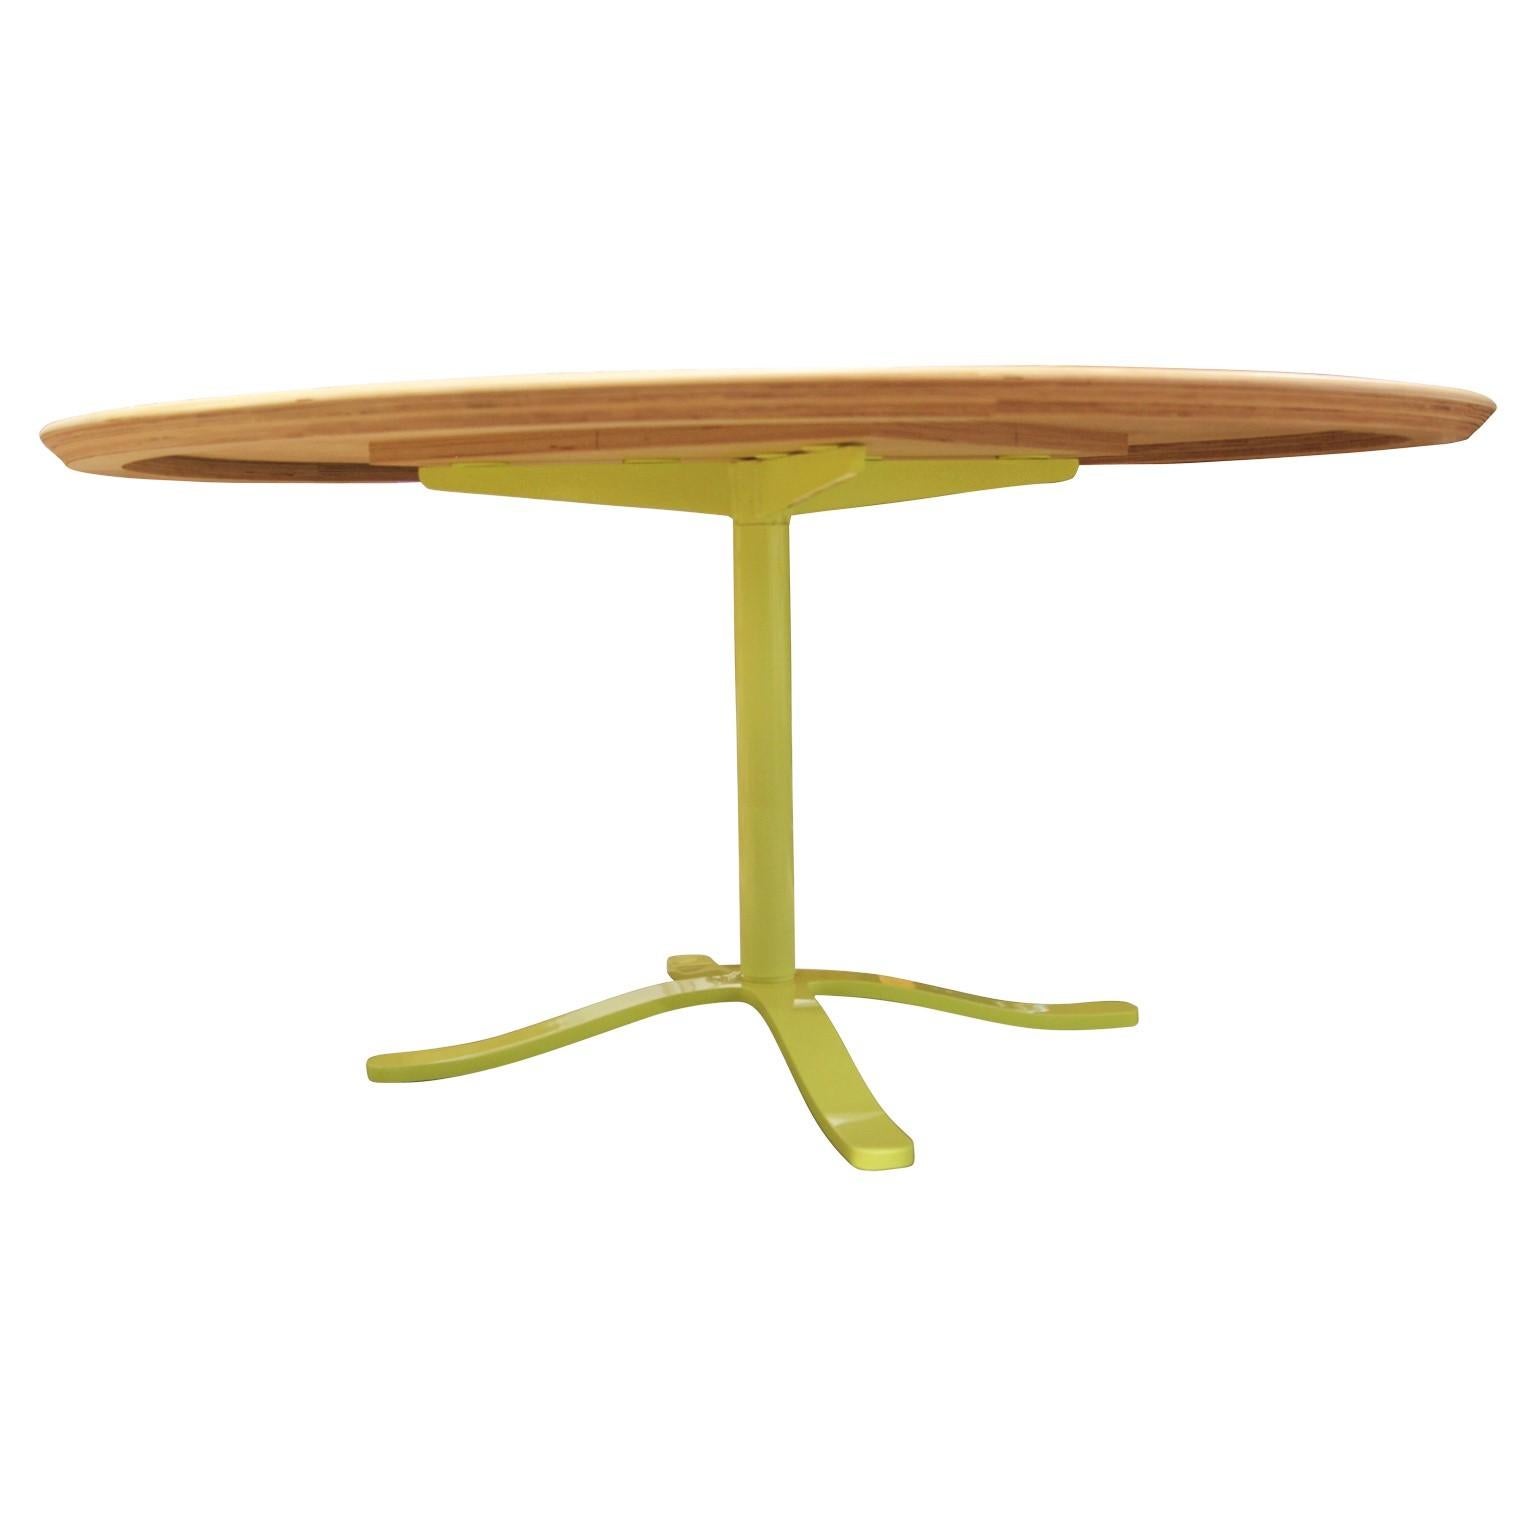 Unique custom round dining table with a neon yellow steel base. The top is made from light solid oak and is in the Mid-Century Modern style. Made in Houston, TX by Reeves Design + Art local craftsman team.